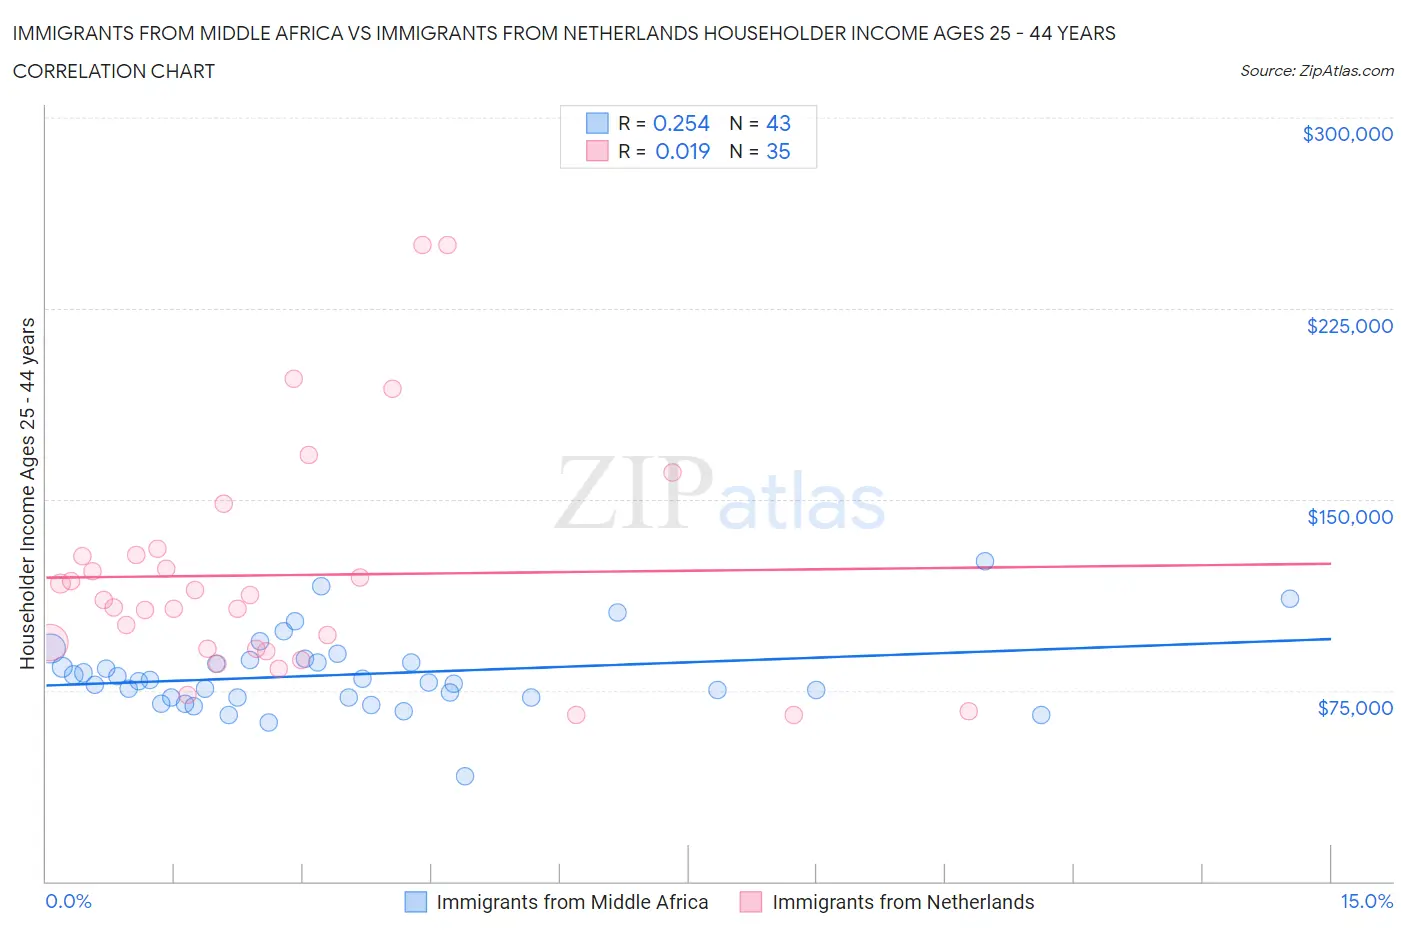 Immigrants from Middle Africa vs Immigrants from Netherlands Householder Income Ages 25 - 44 years